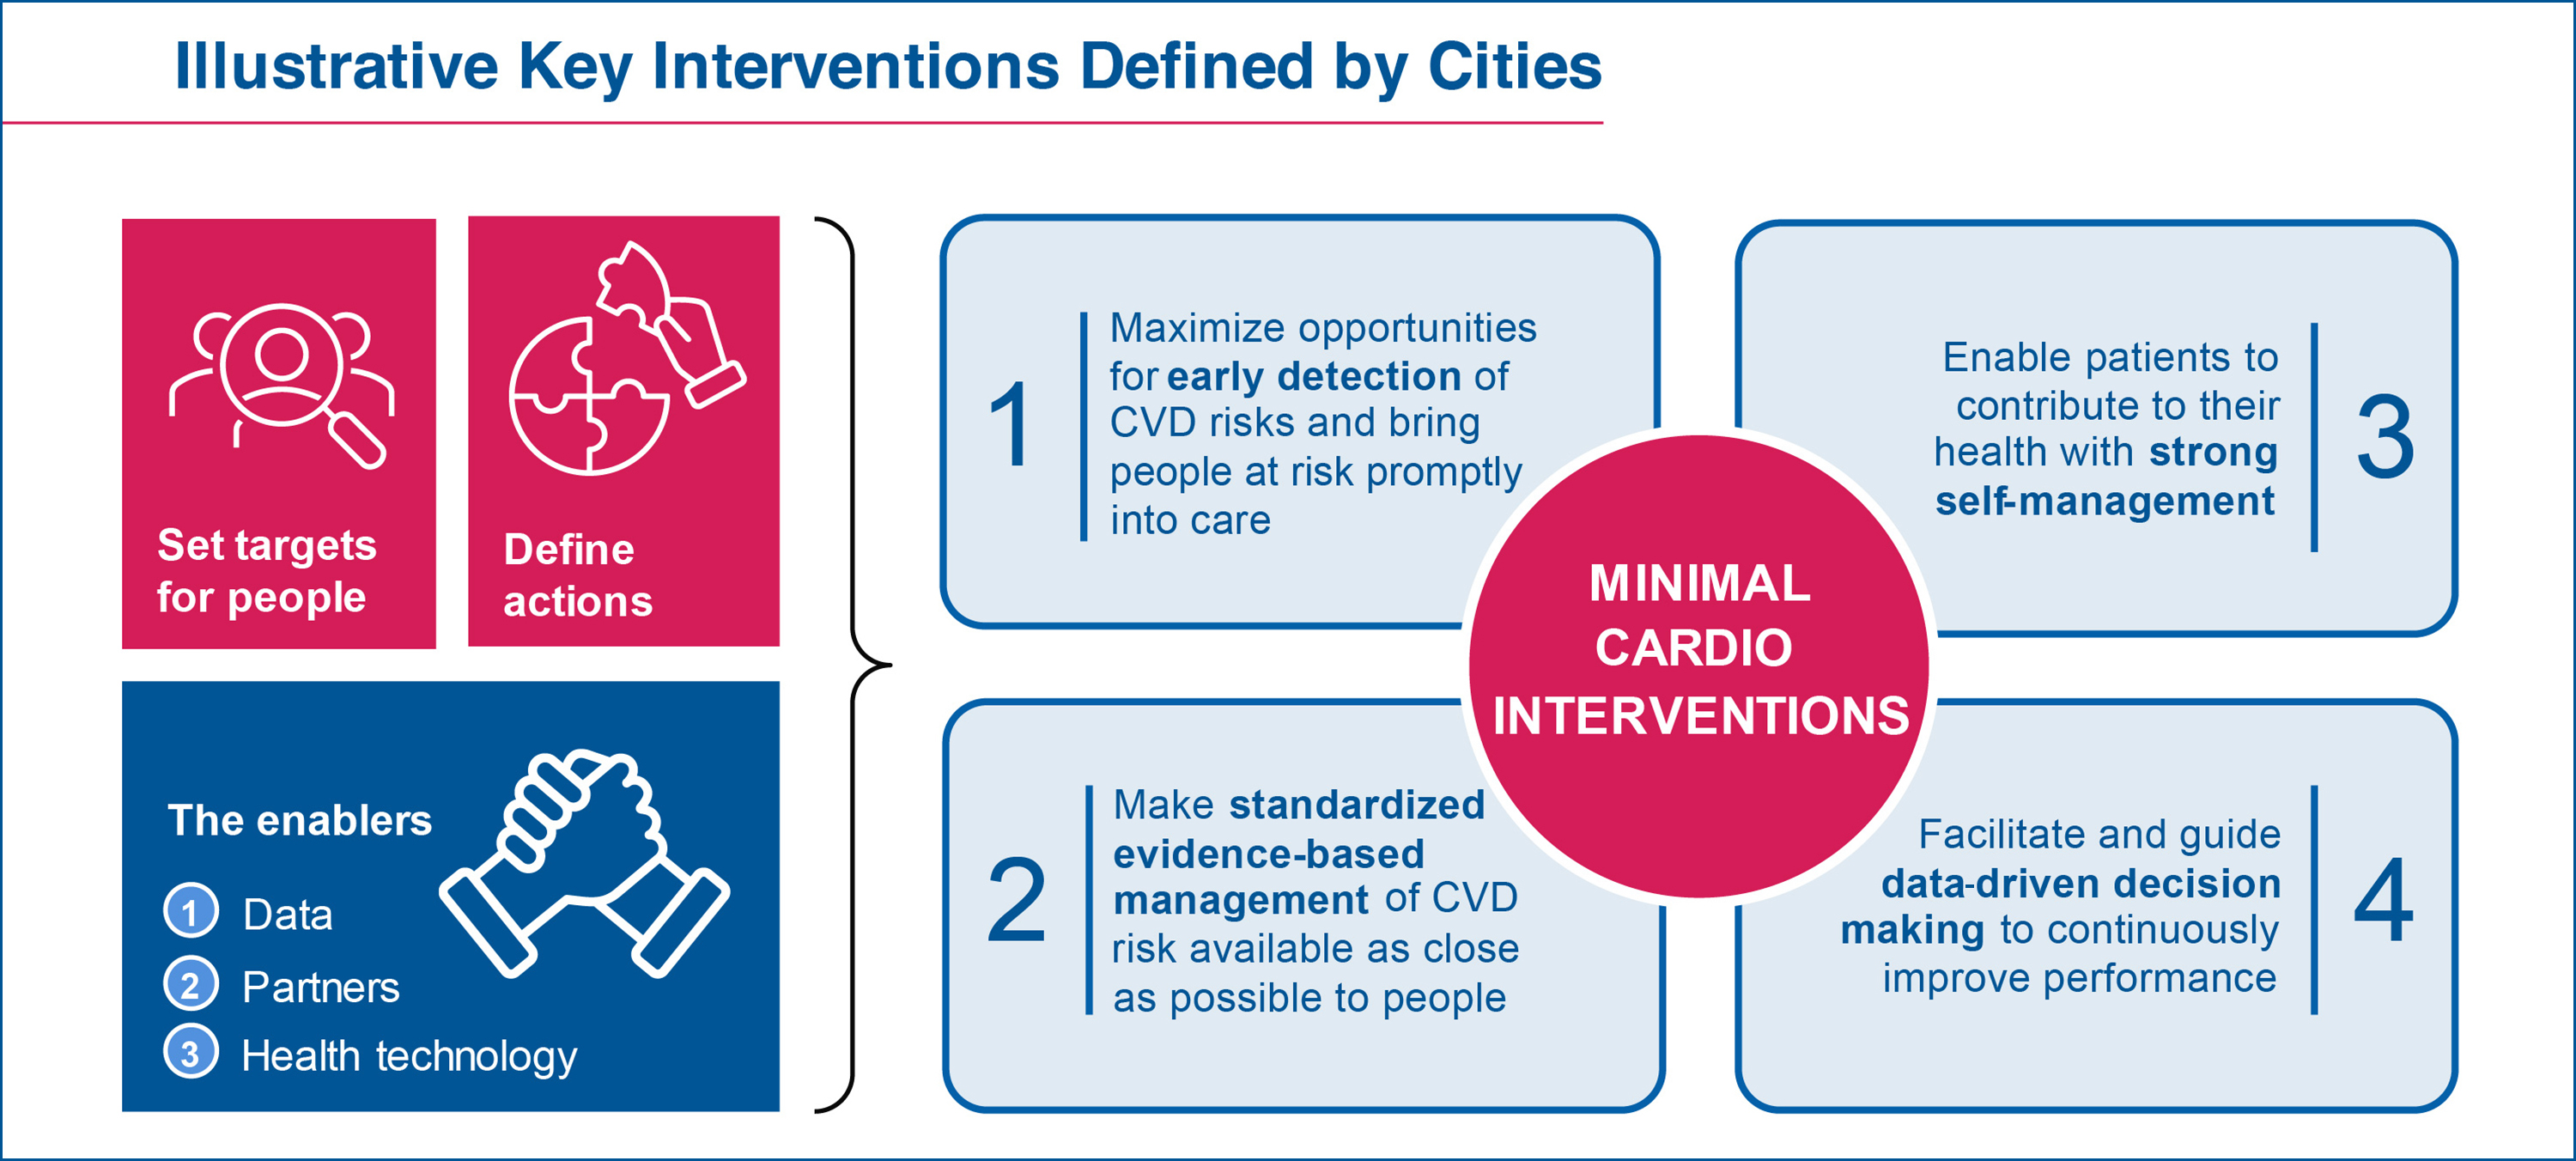 Illustrative Key Interventions Defined by Cities graphic: Set targets; Define actions; Enable Data, Partners, and Health Technology. 4 steps for minimal intervention: 1) Early detection; 2) Standardized evidence-based management; 3) Strong self-management; 4) Data-driven decision making.